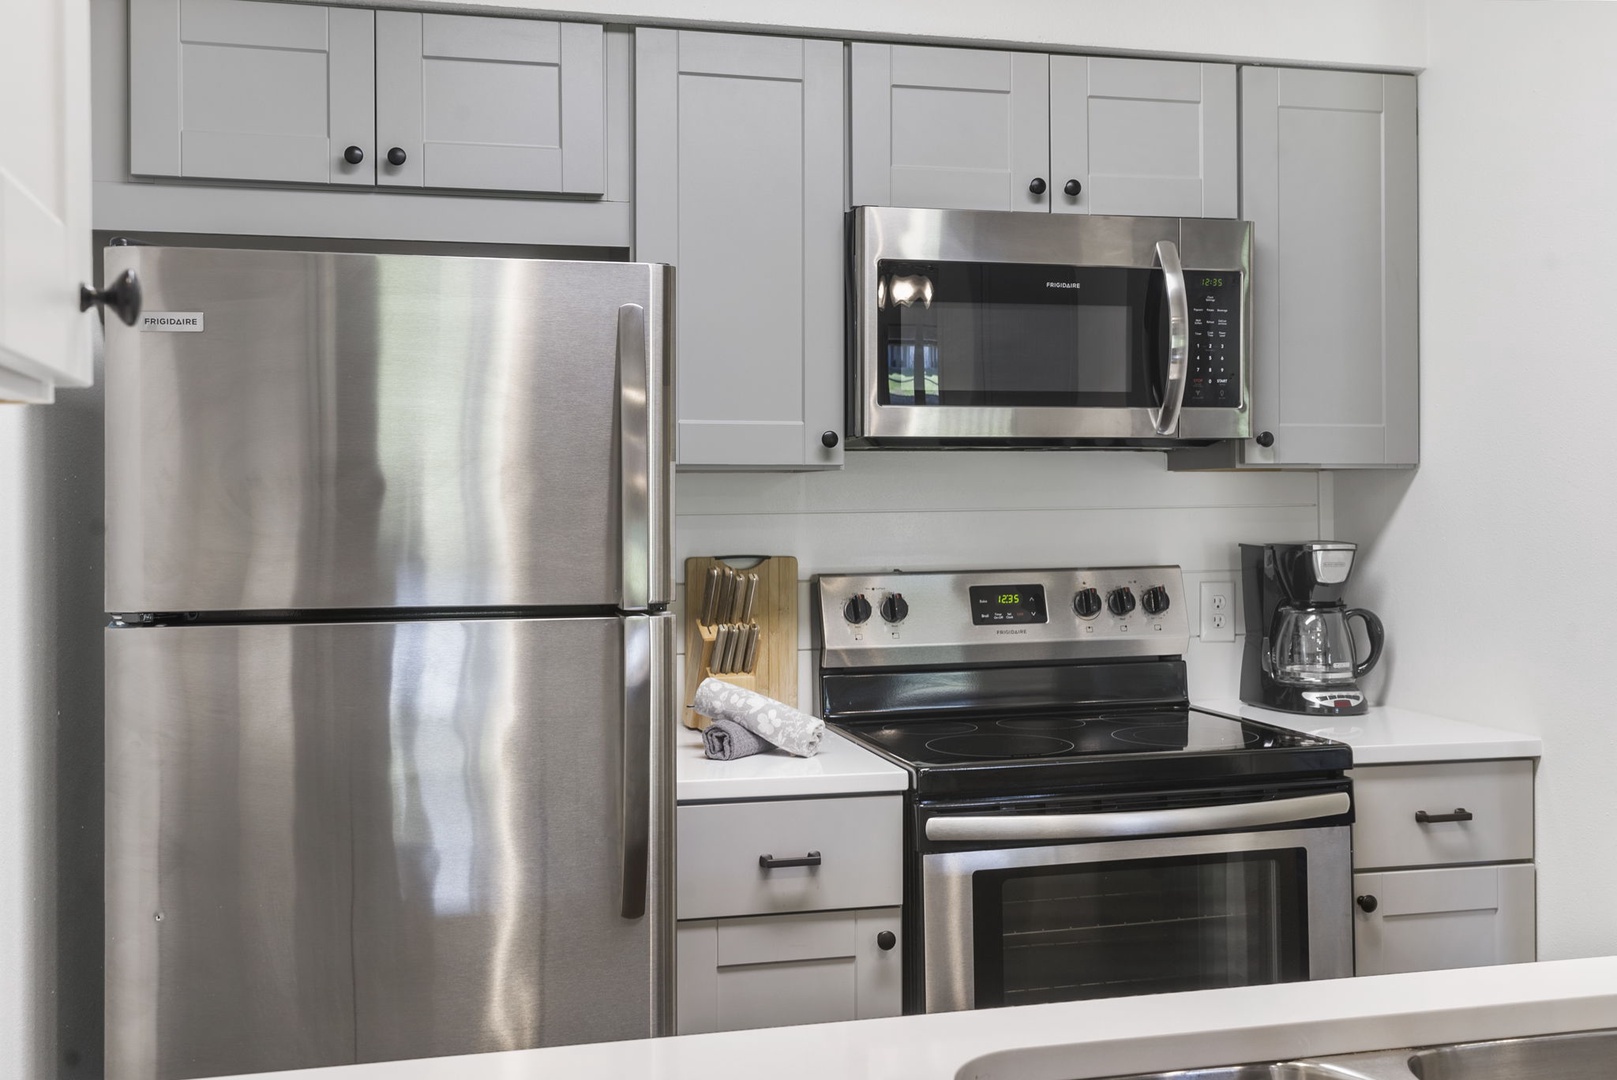 The updated kitchen offers ample storage space & all the comforts of home